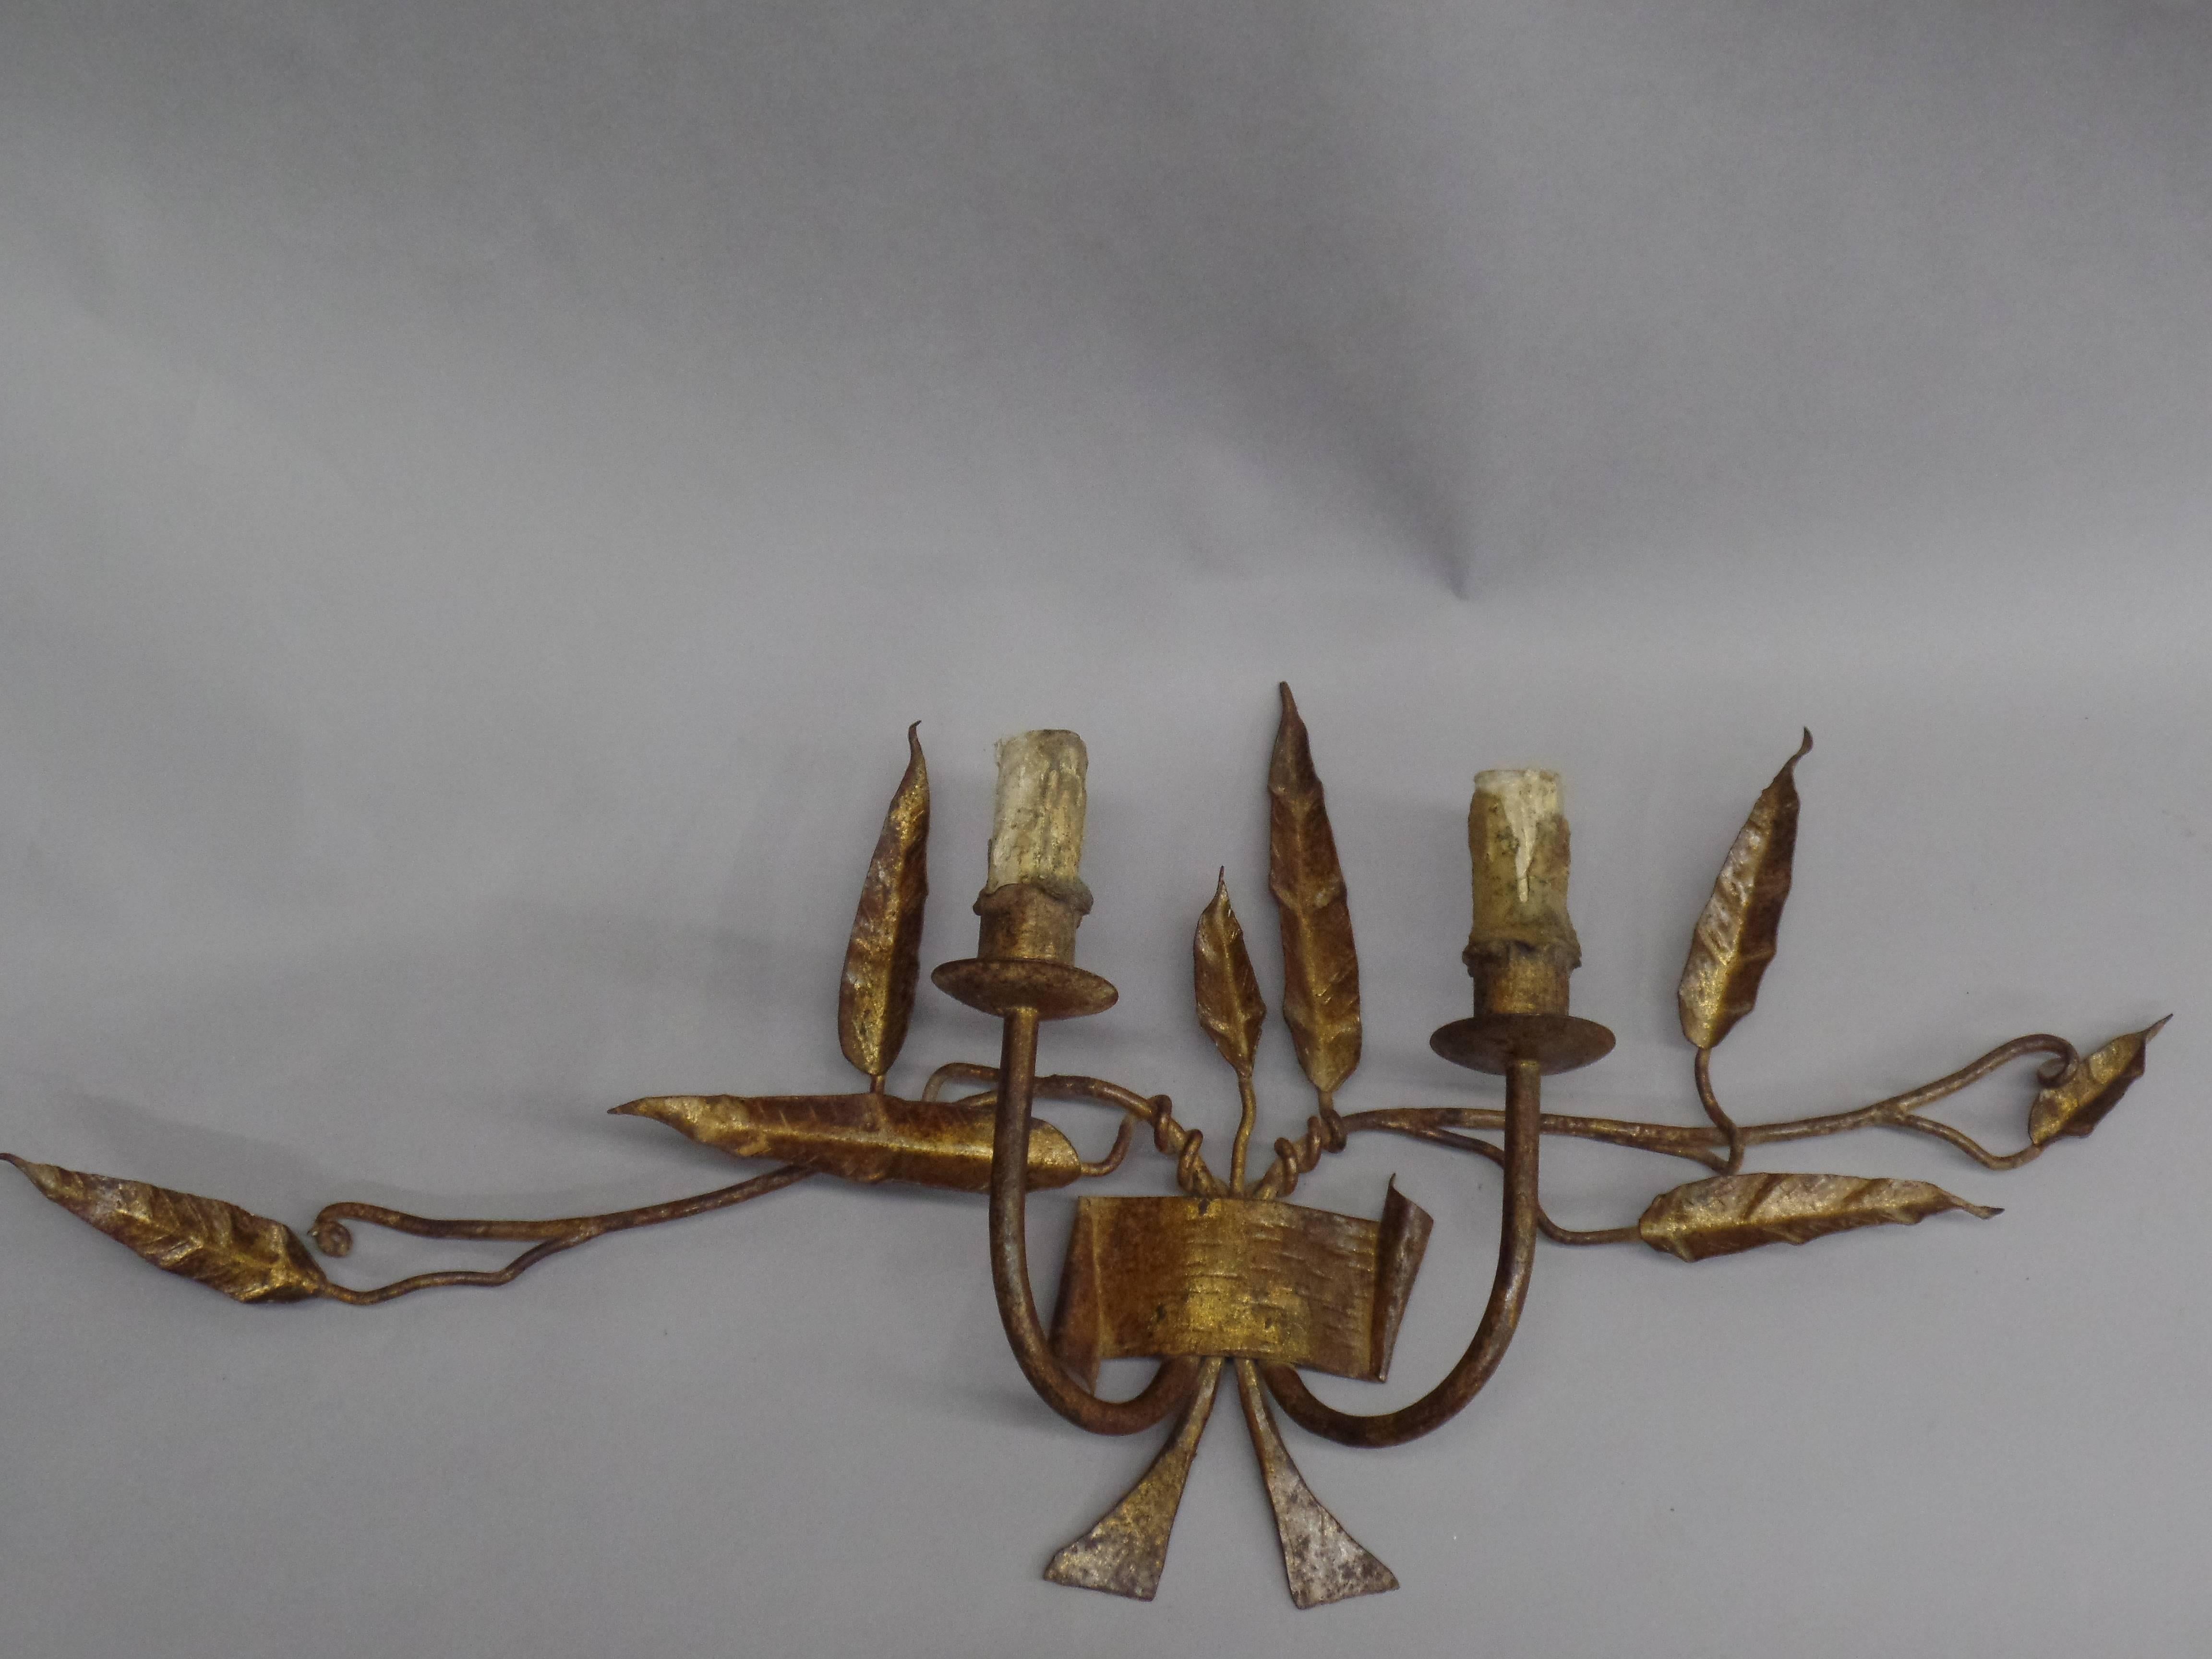 Exquisite pair of French 1940s hand-wrought iron and hand gilt double arm wall sconces. The pieces have a naturalistic, poetic quality conveying the sublime through its delicate branches and leaves. The artistry and delicacy of the pieces reflect